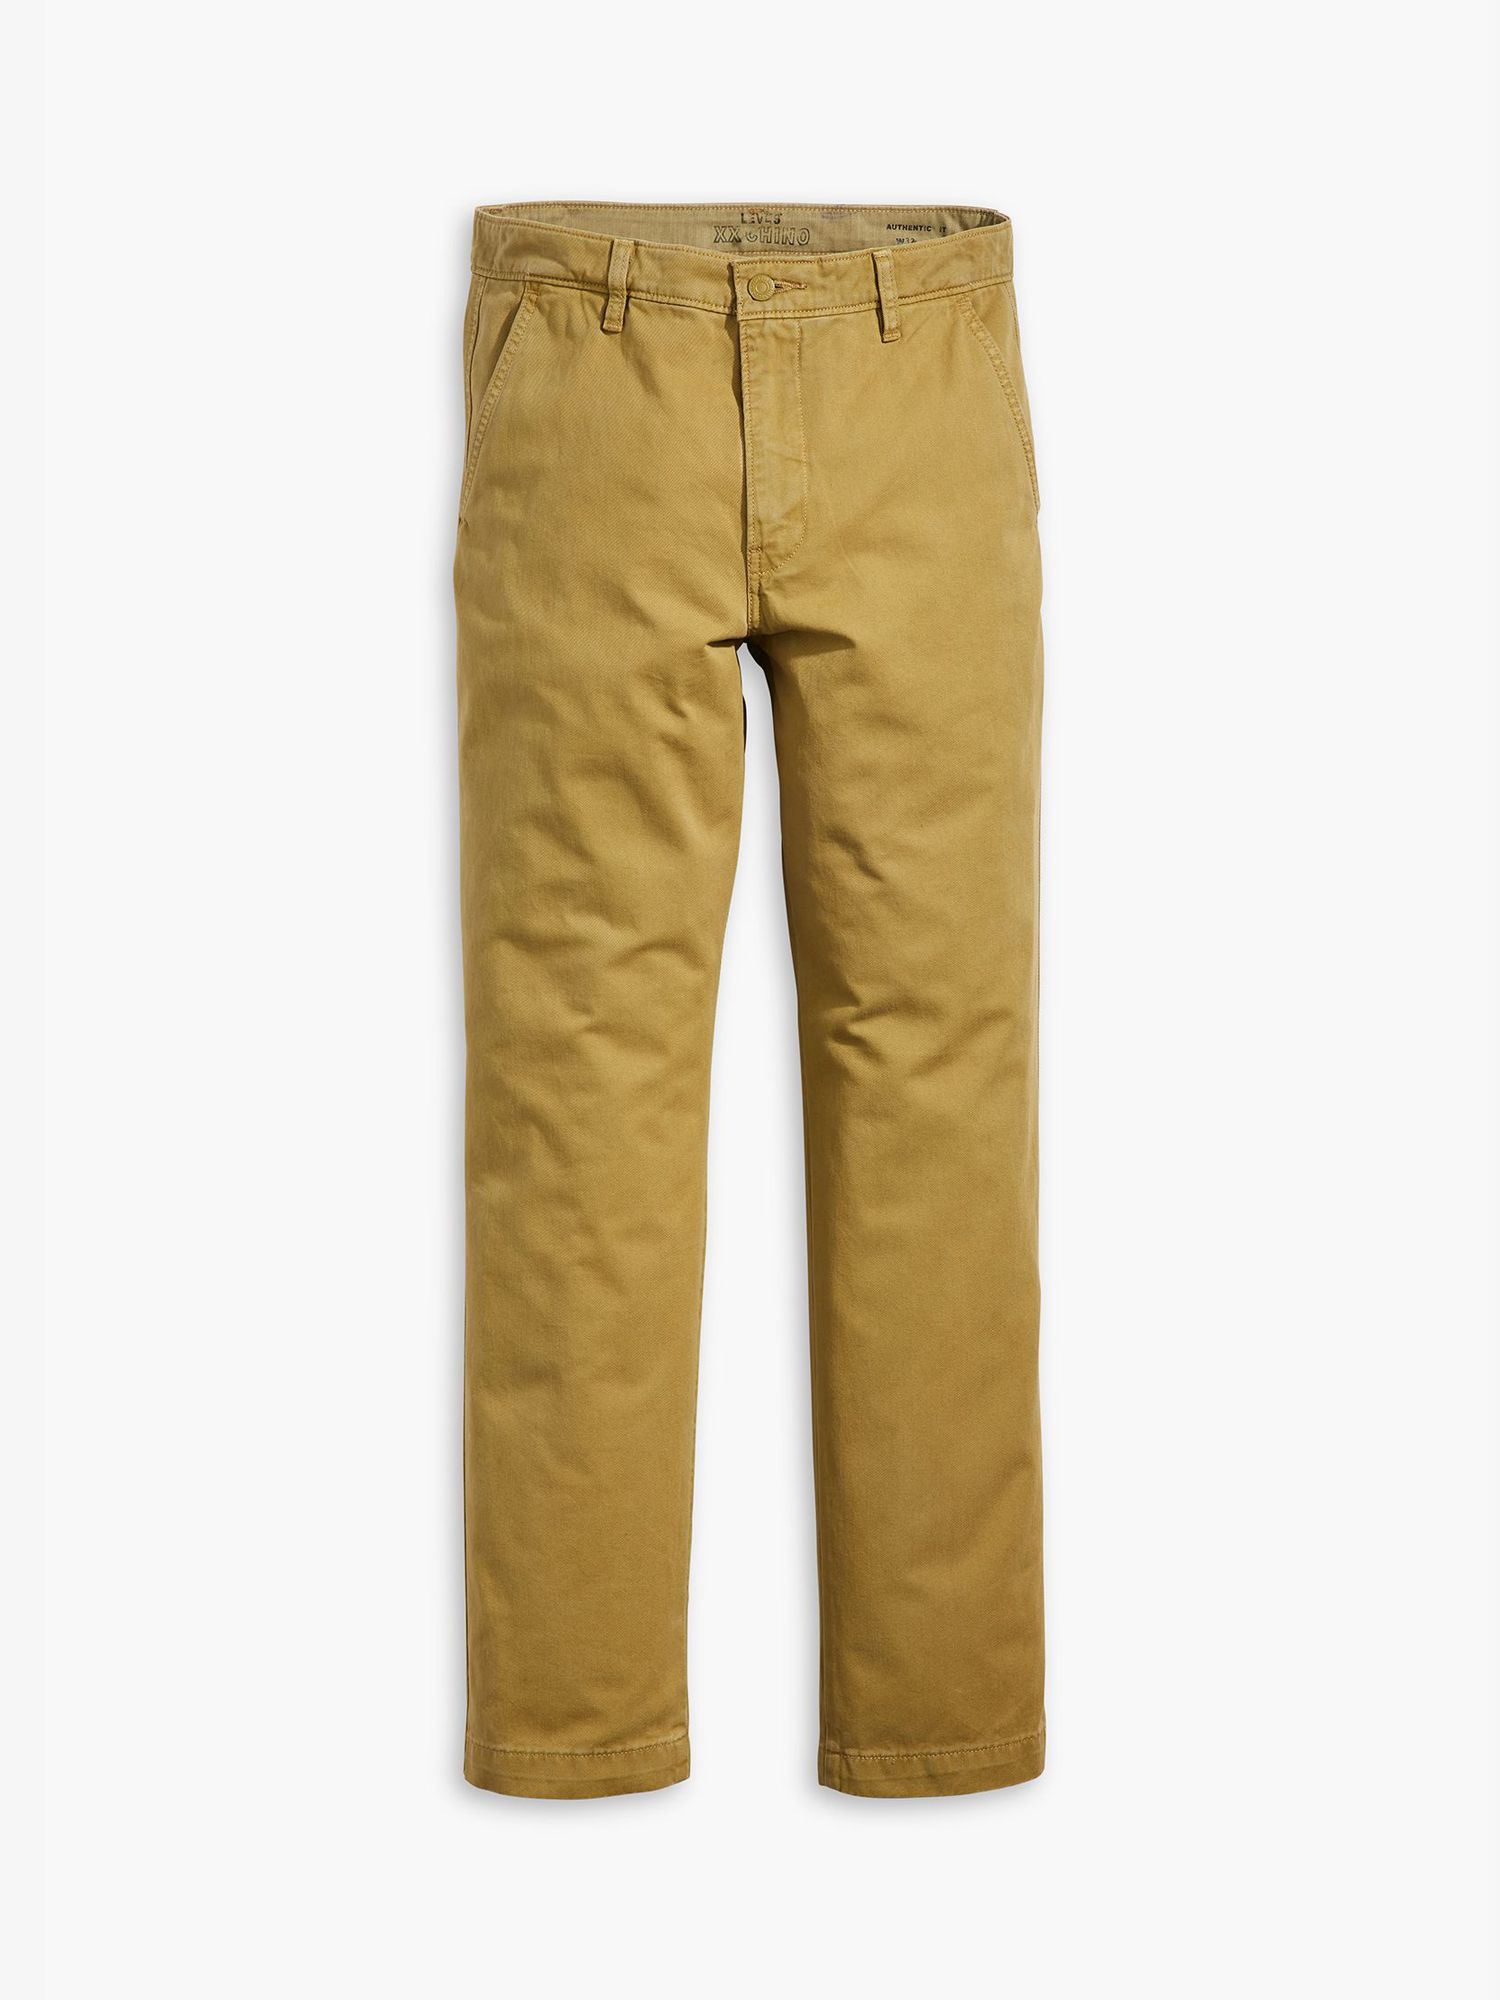 Levi's Chino Authentic Straight Trousers, Khaki at John Lewis & Partners